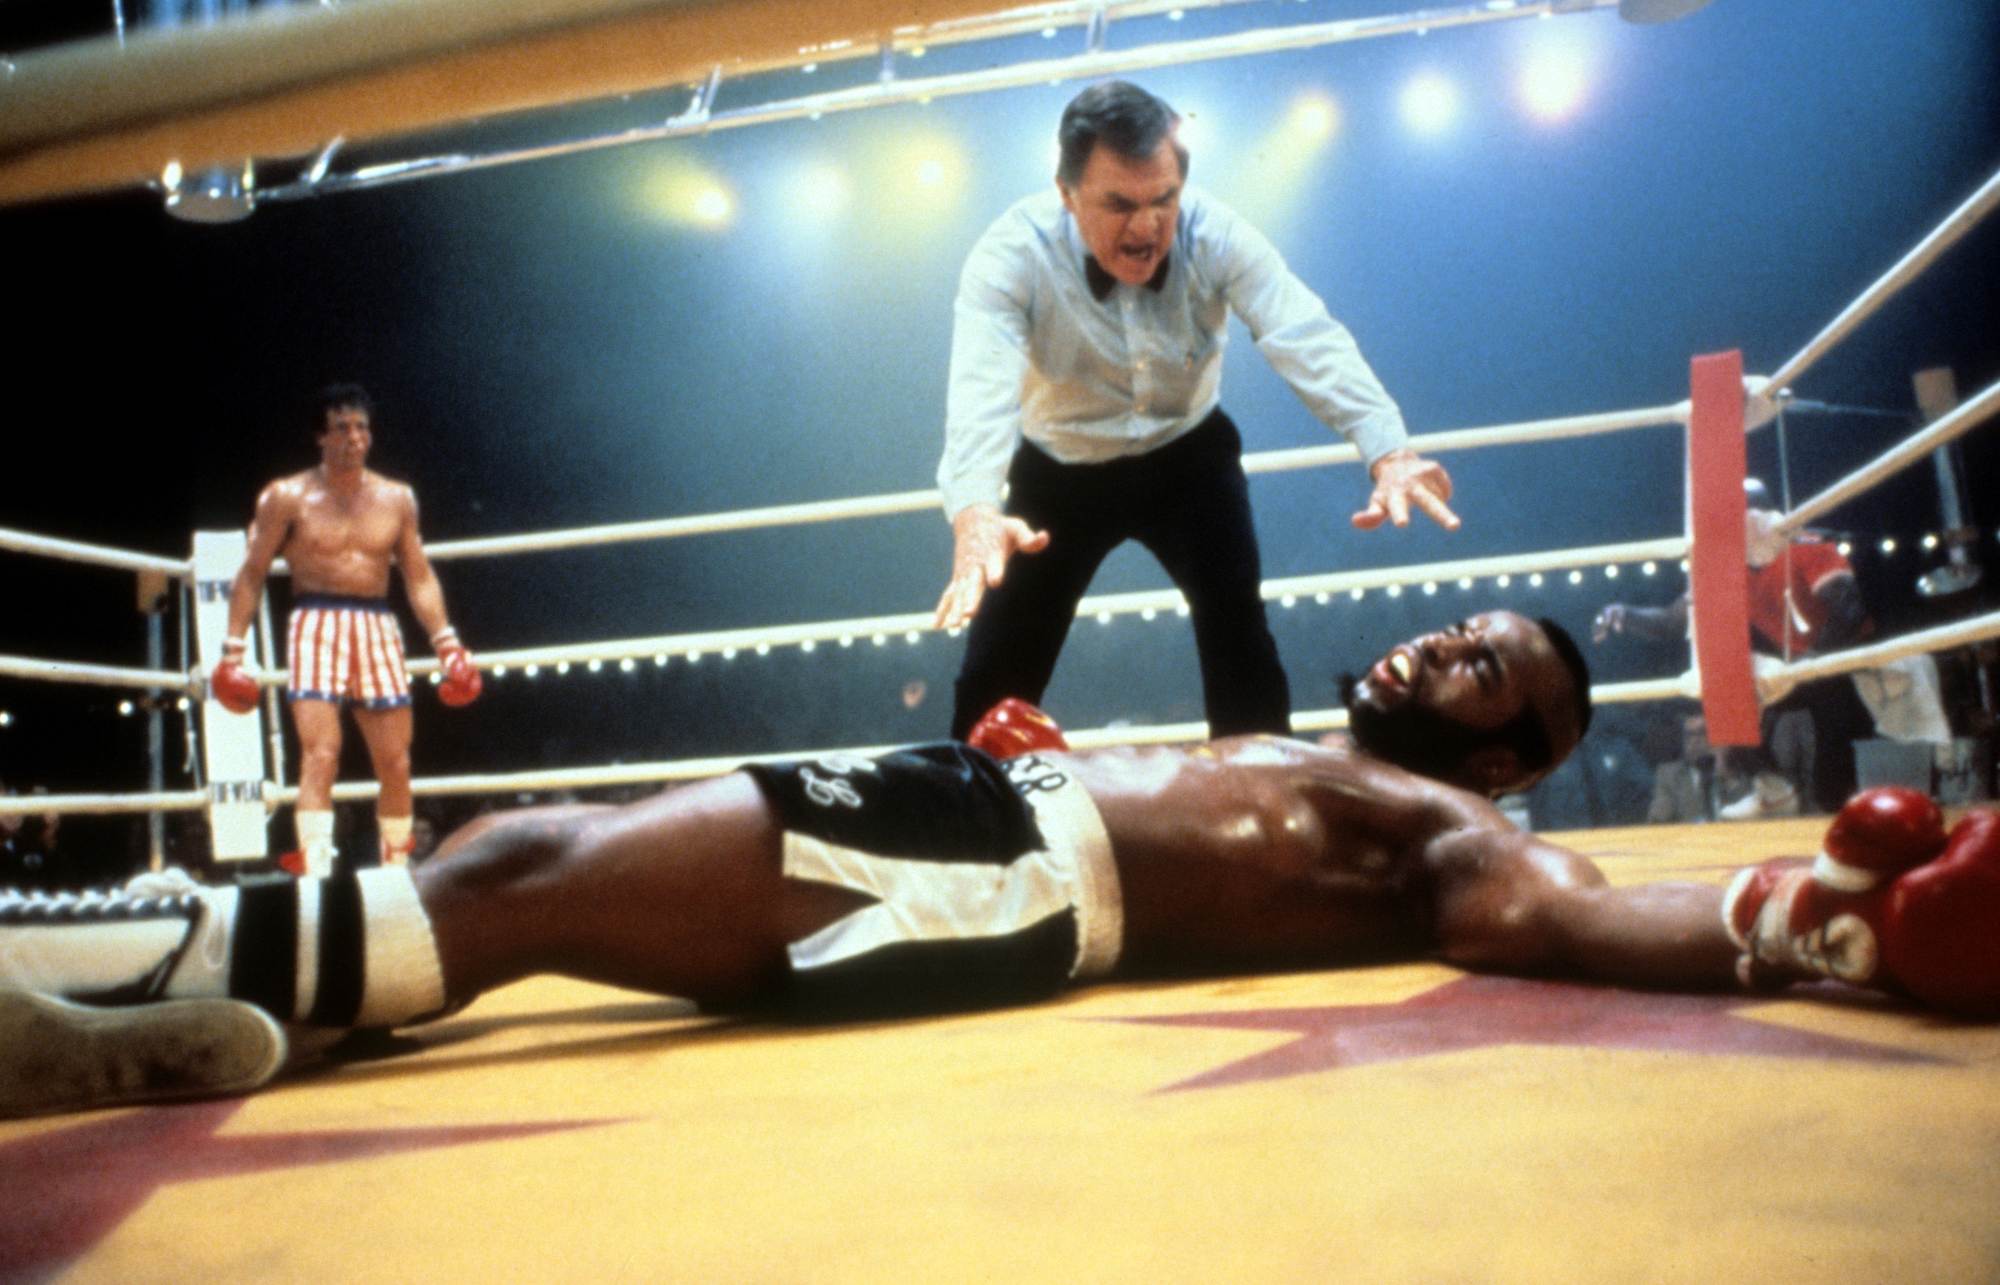 'Rocky III' movies Sylvester Stallone as Rocky and Carl Weathers as Apollo Creed. Rocky standing in the corner of the ring and Apollo on the ground with the referee counting.